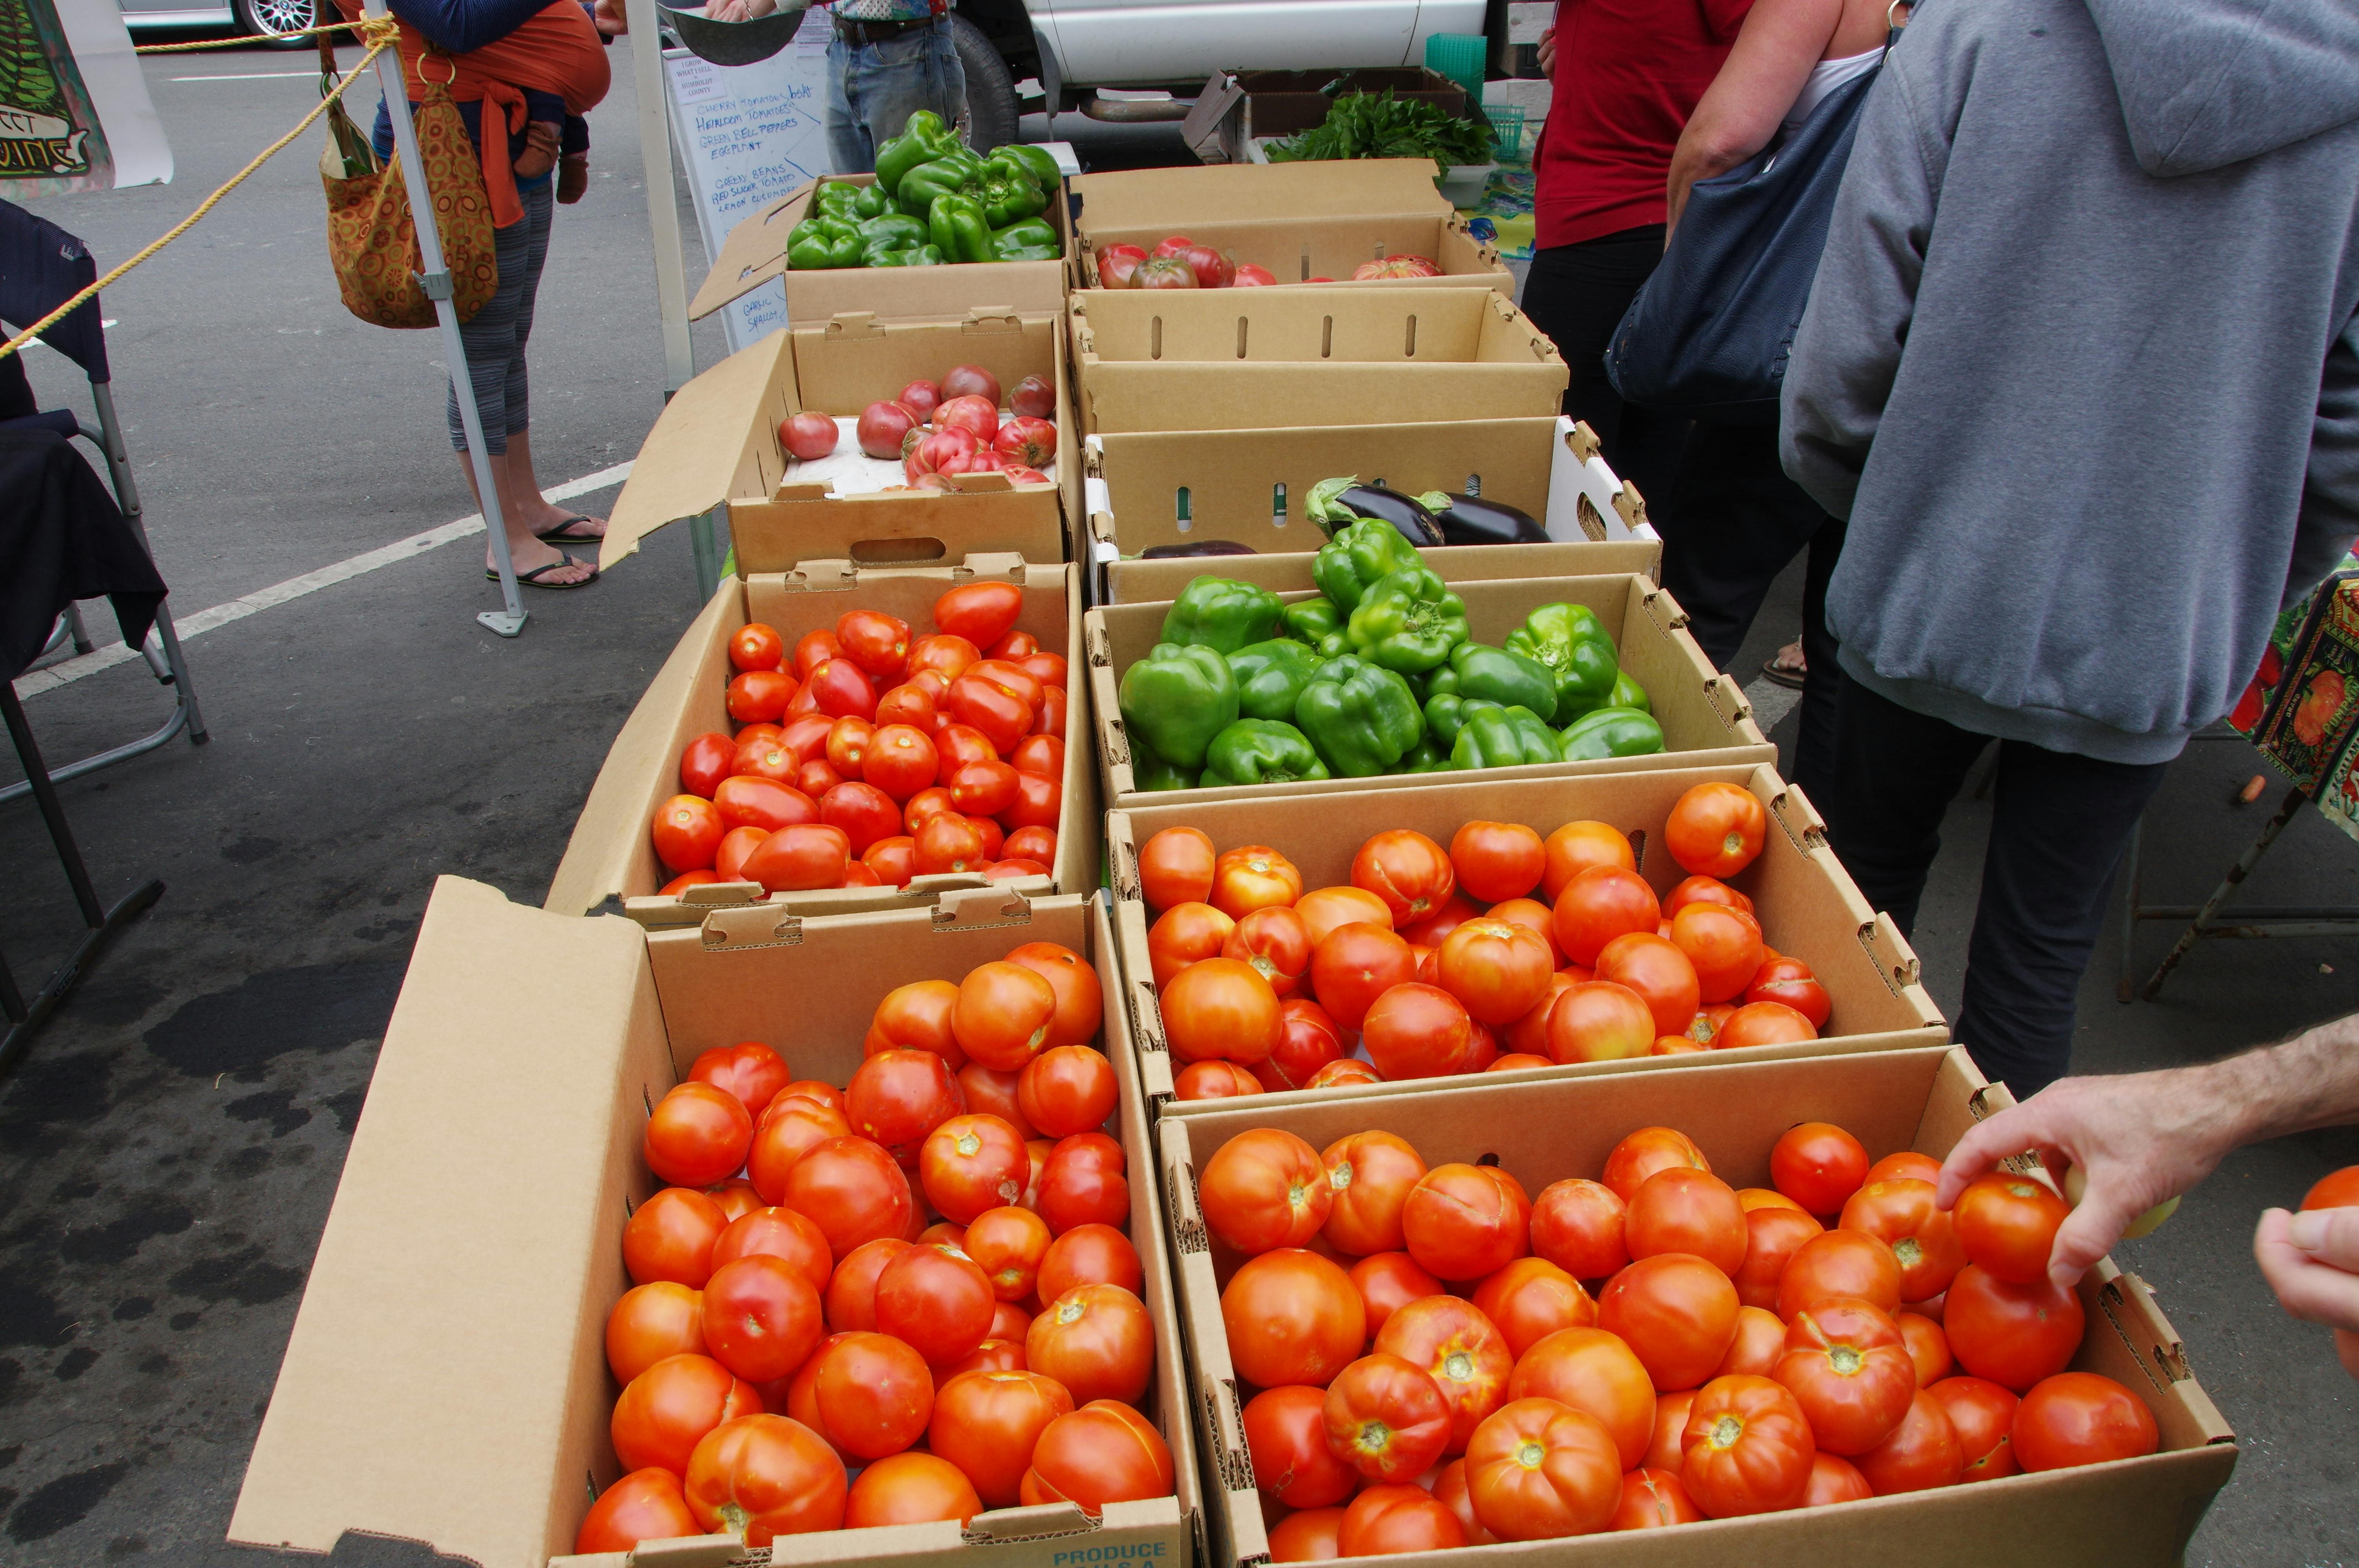 Boxes on local produce with tomatoes and bell peppers.